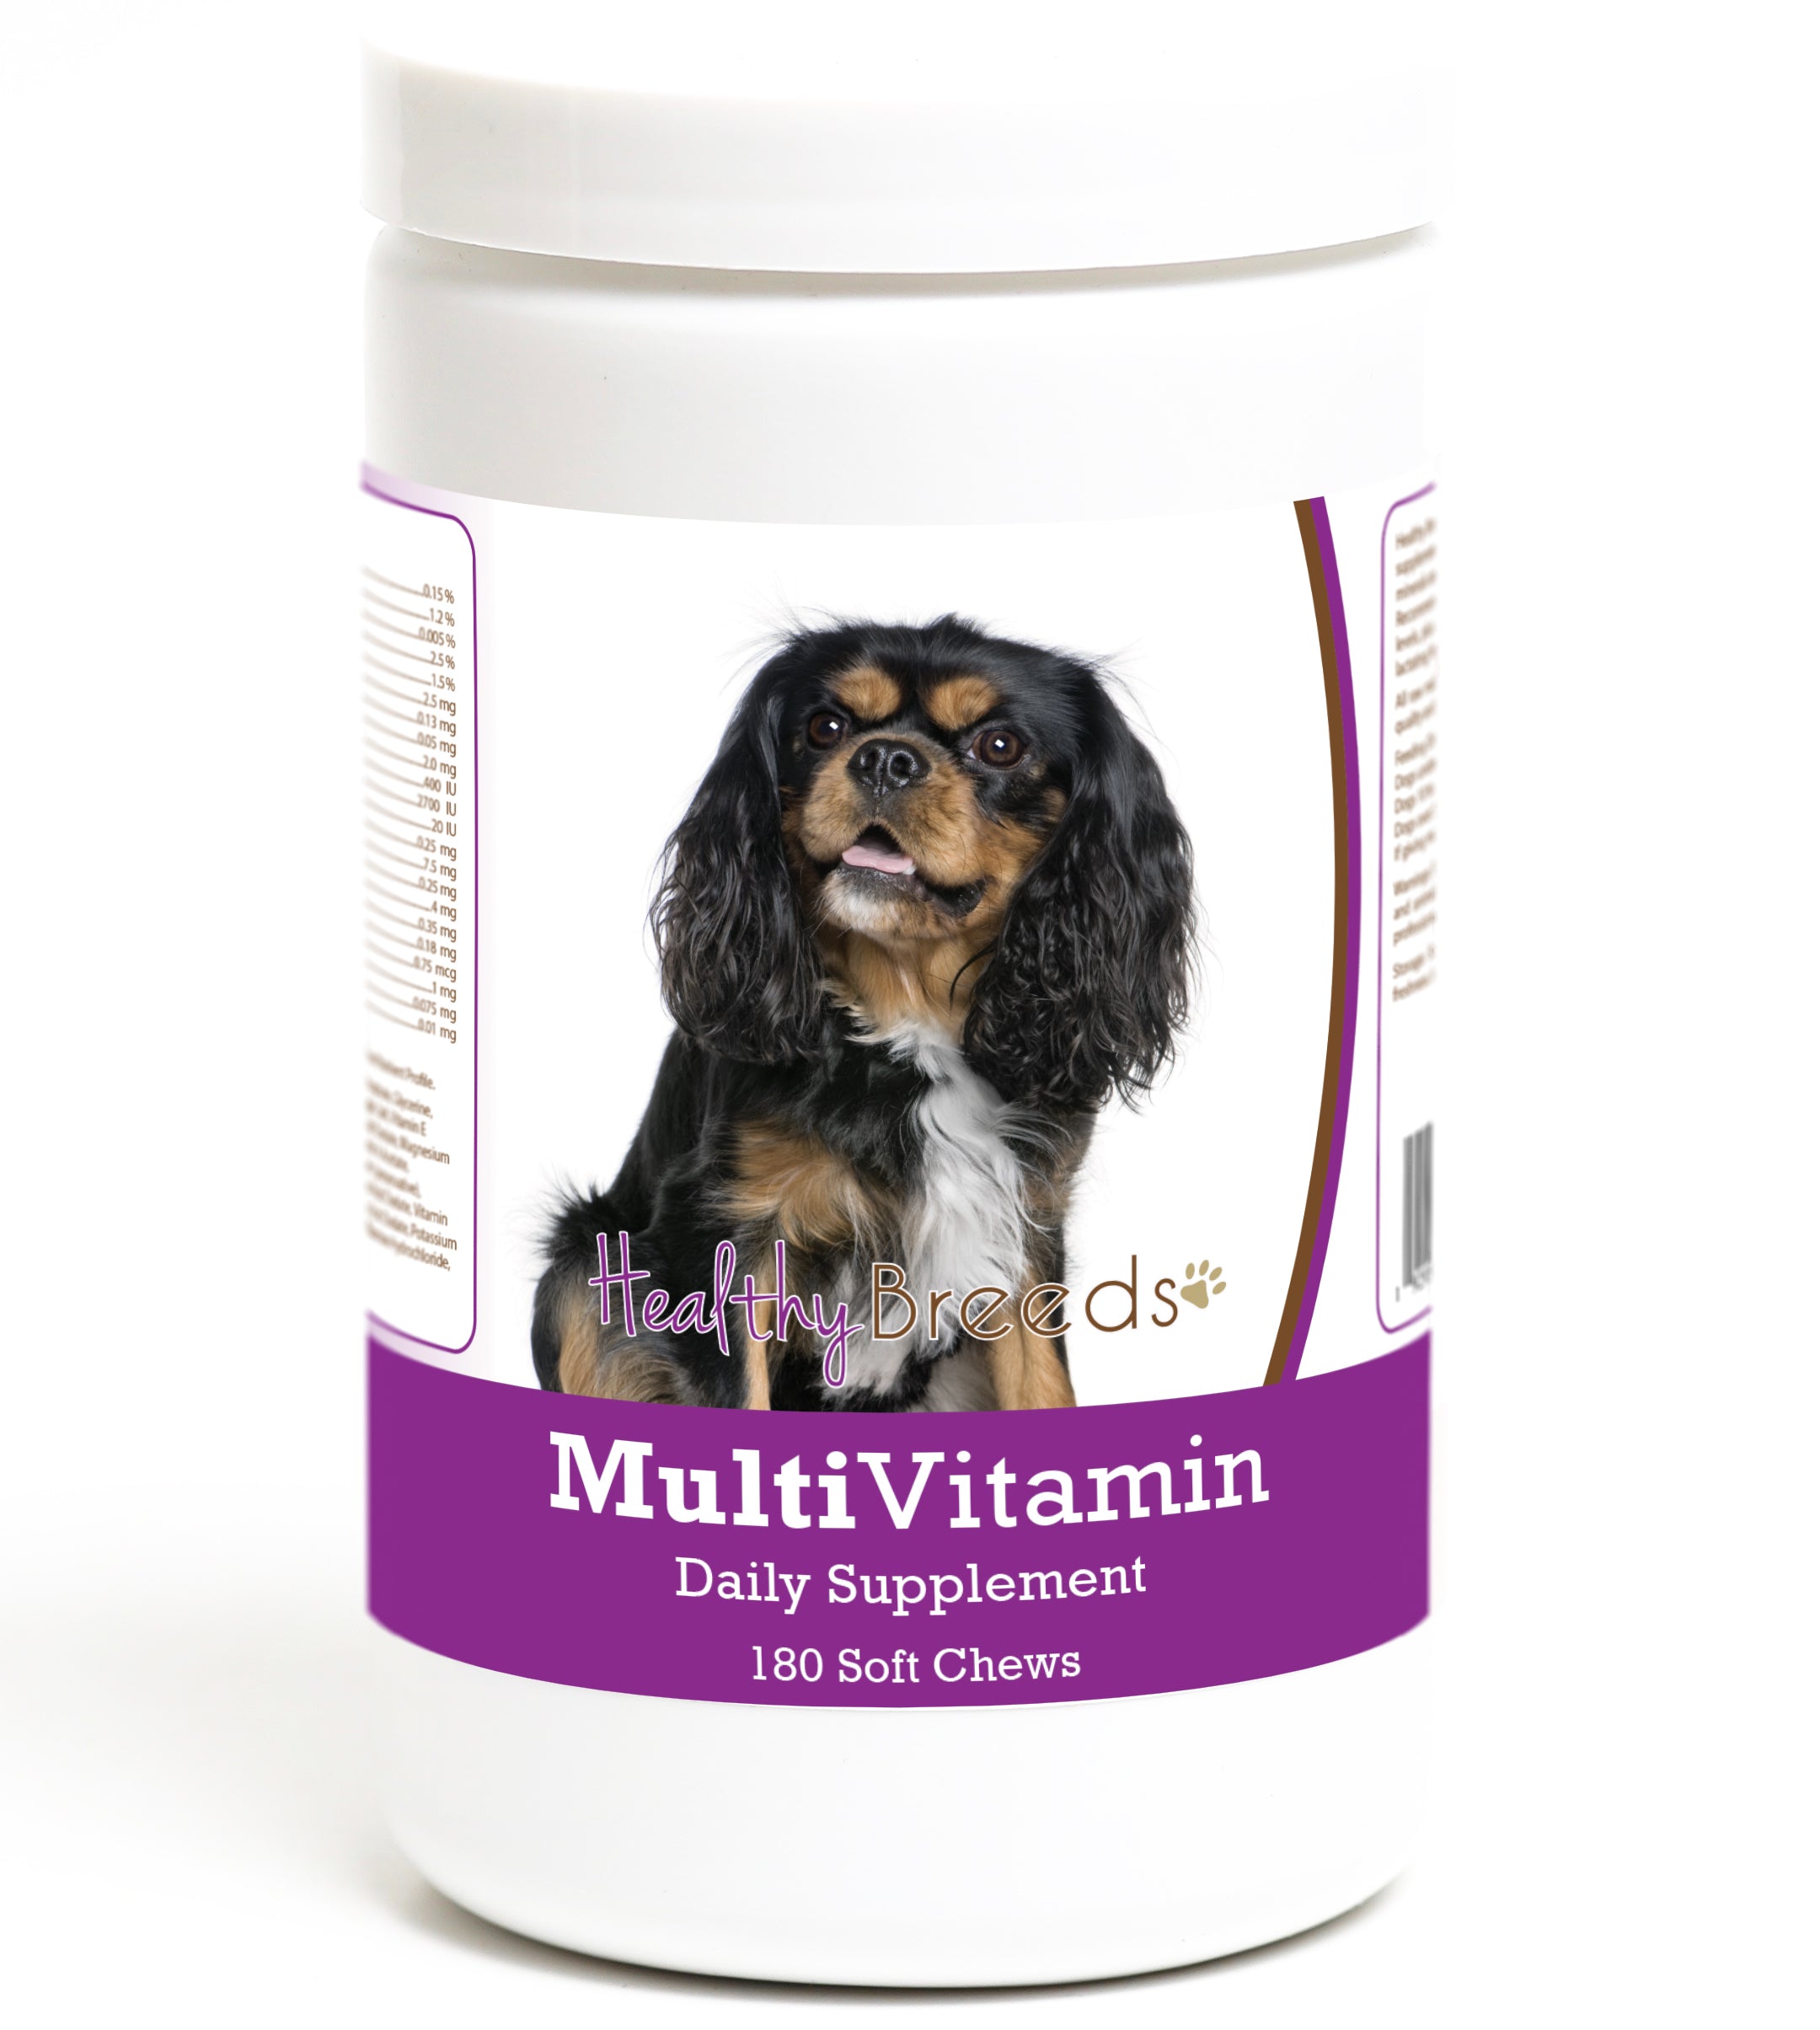 Cavalier King Charles Spaniel Multivitamin Soft Chew for Dogs 180 Count